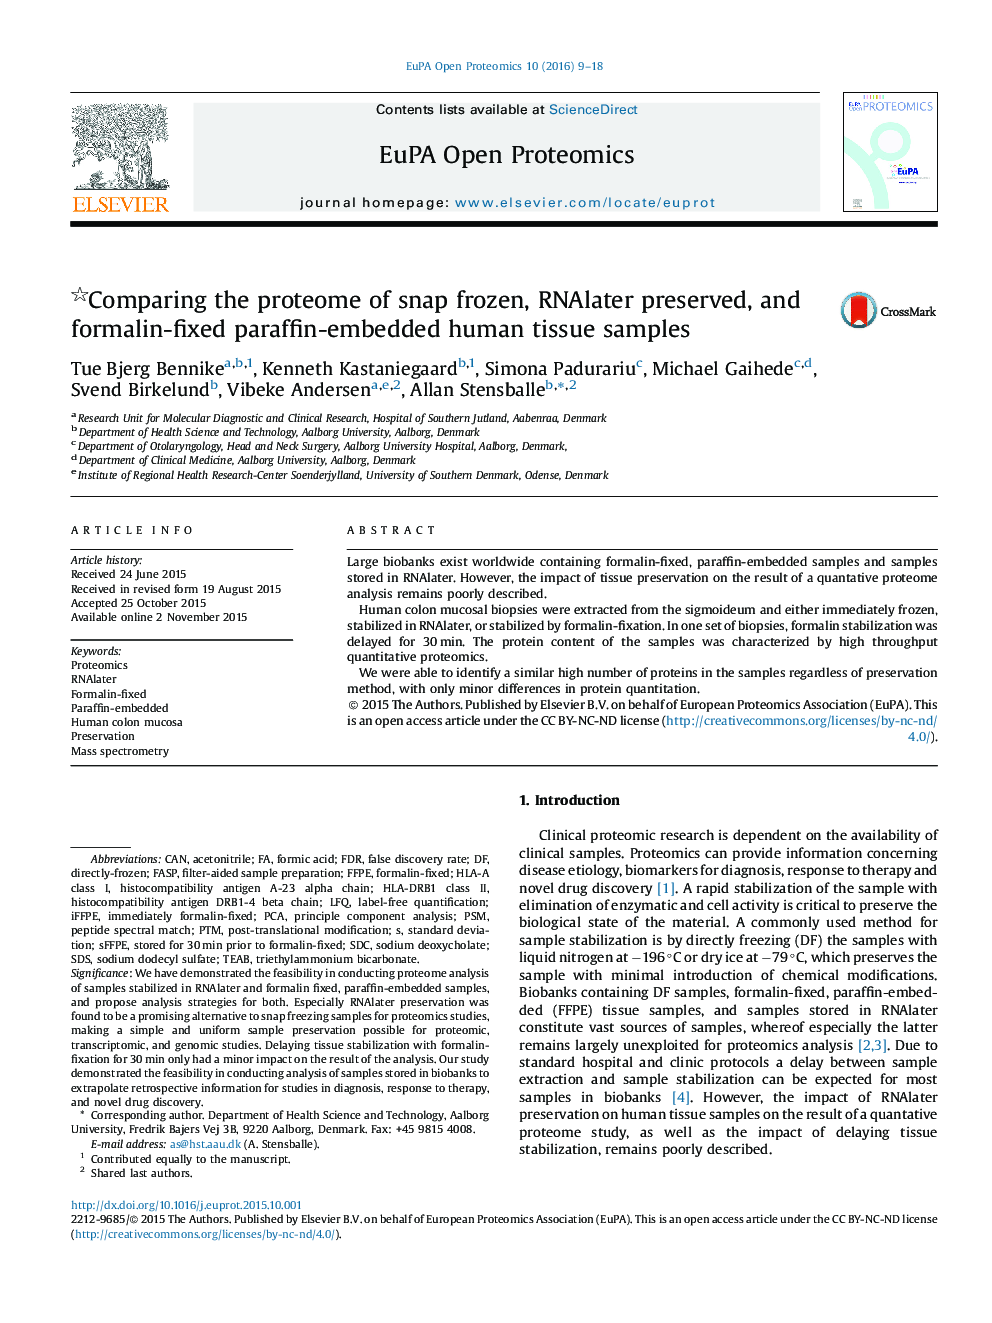 Comparing the proteome of snap frozen, RNAlater preserved, and formalin-fixed paraffin-embedded human tissue samples 